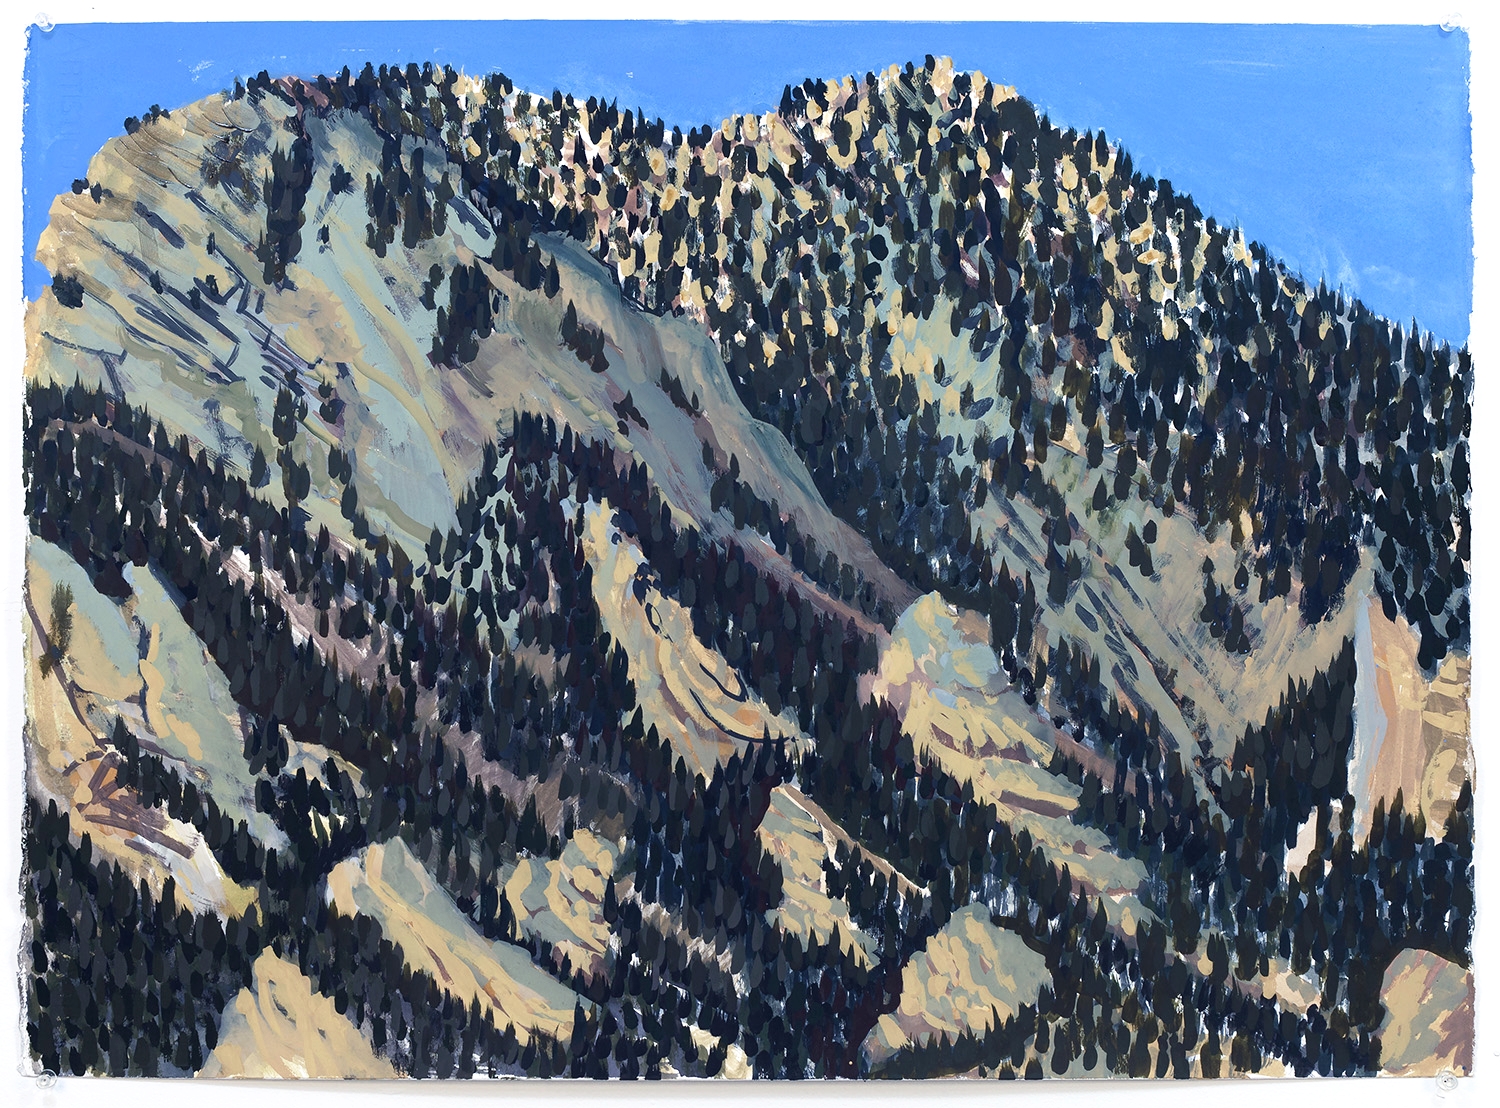  Bear Peak no. 6, 2017, watercolor and gouache on paper, 22 x 30 inches 